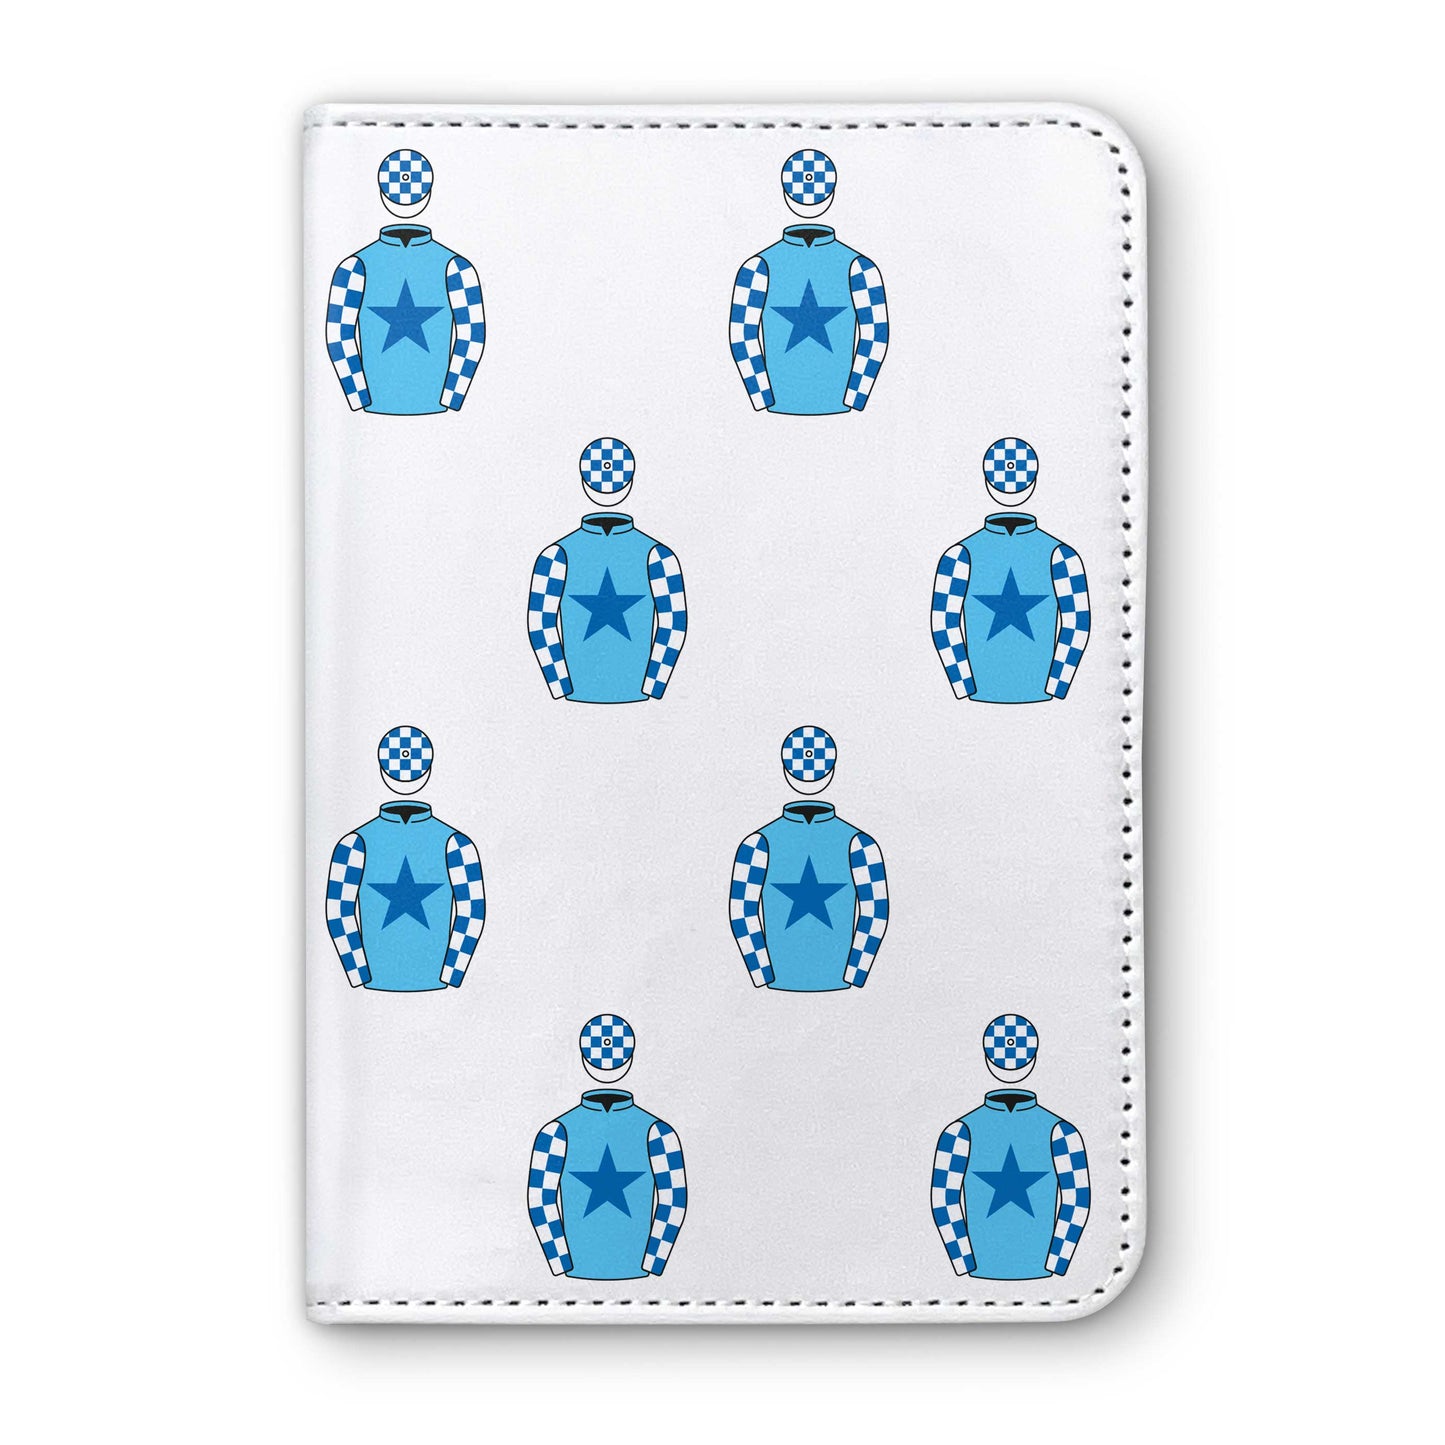 Crossed Fingers Partnership Horse Racing Passport Holder - Hacked Up Horse Racing Gifts